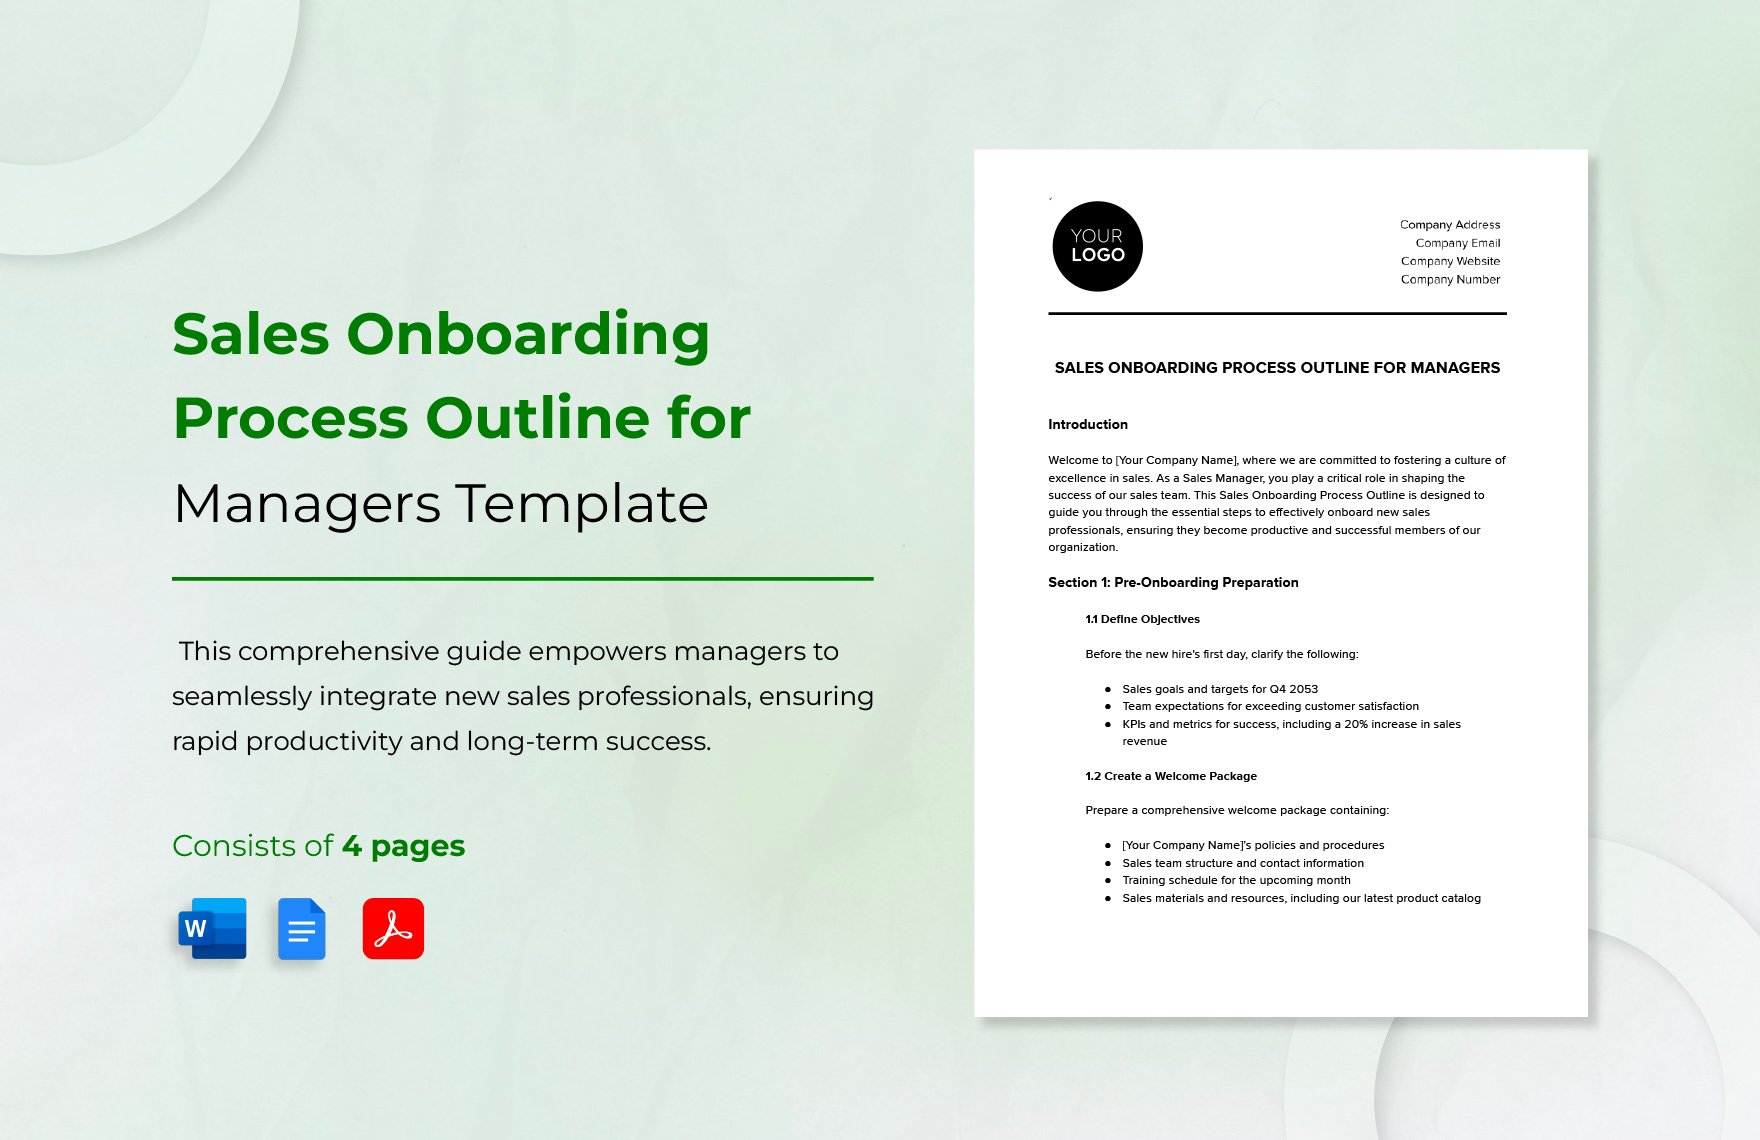 Sales Onboarding Process Outline for Managers Template in Word, Google Docs, PDF